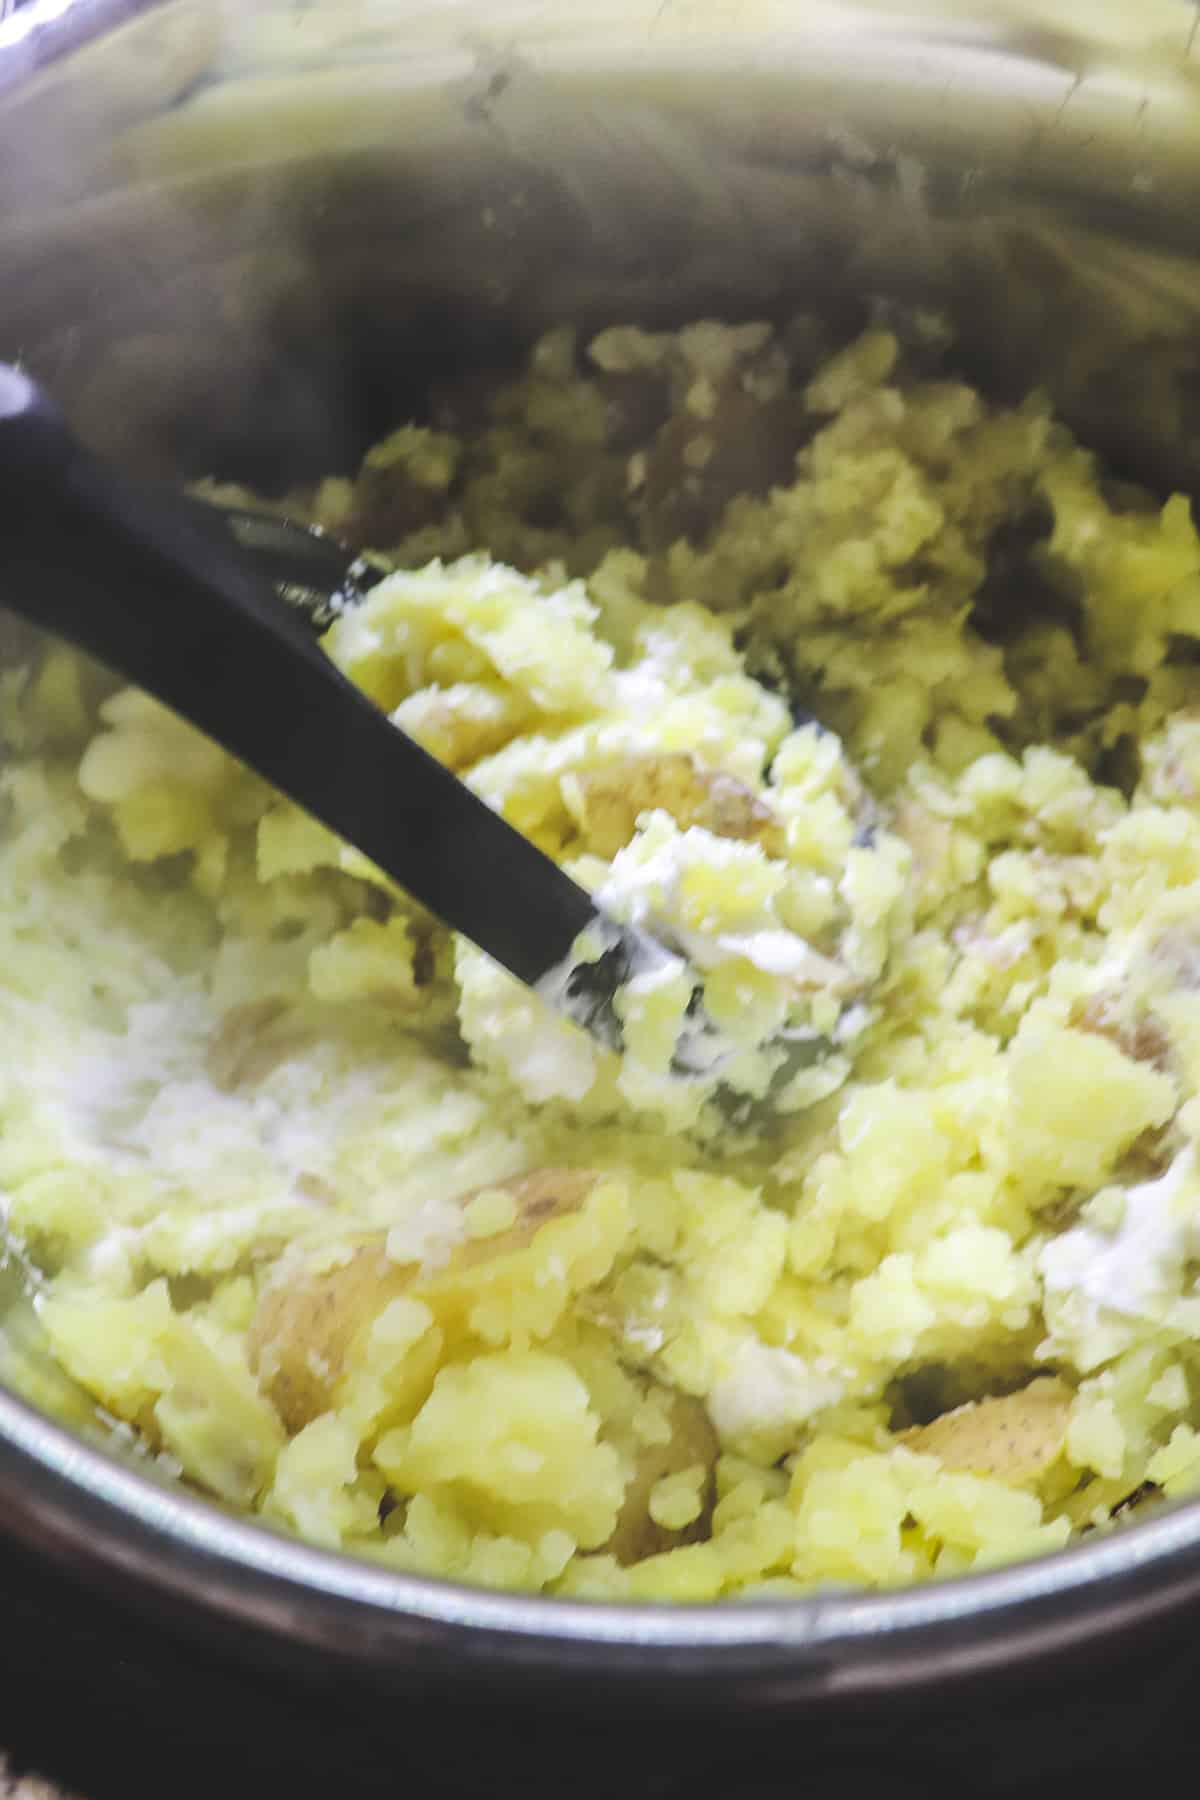 mashing potatoes, cream cheese, and butter in the instant pot